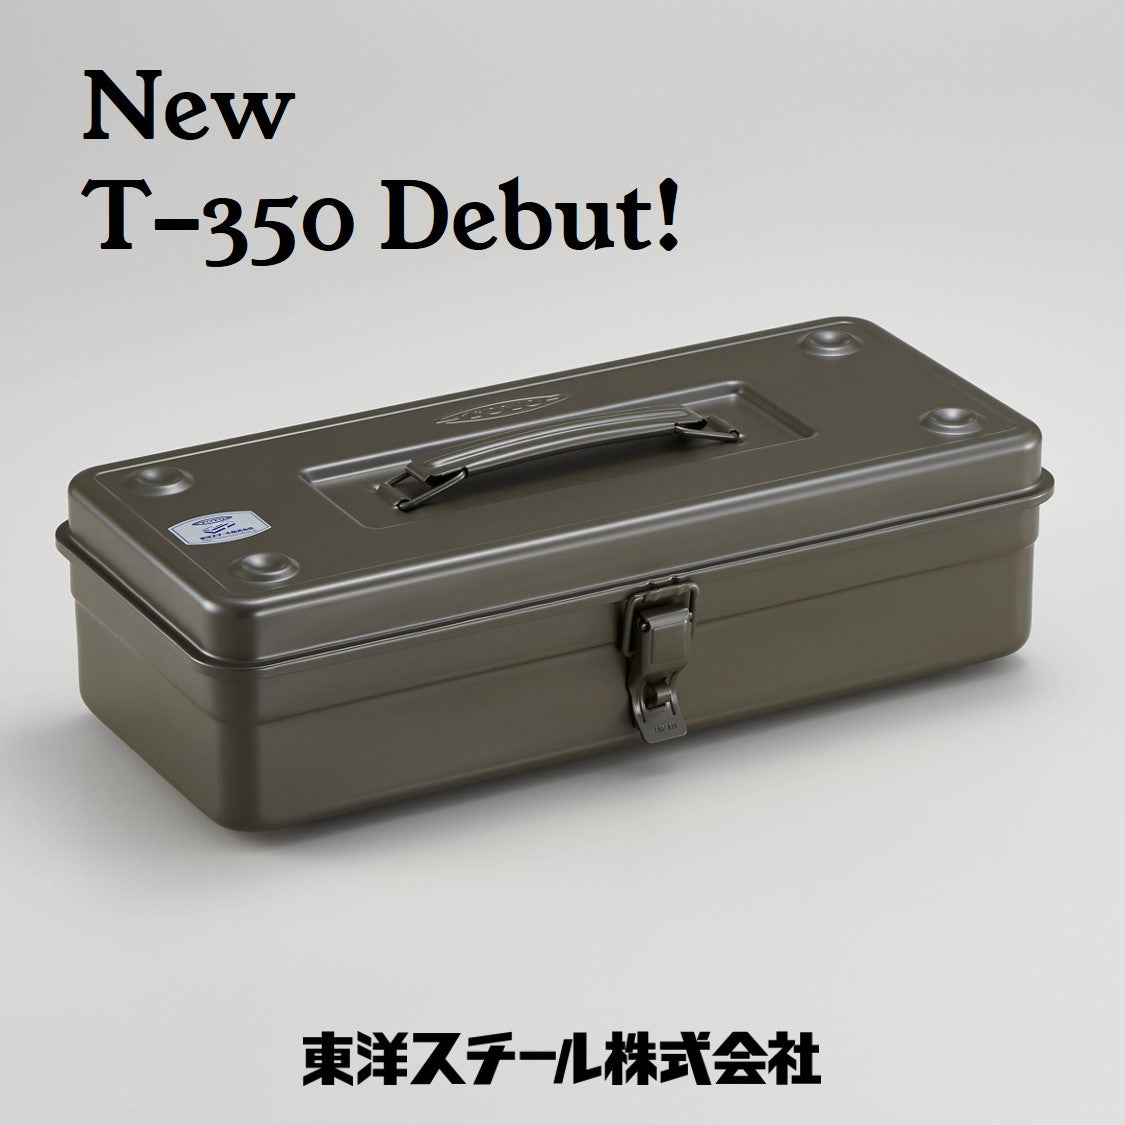 T-350 Debut!（新商品販売のお知らせ） | 東洋スチール株式会社 | TOYO